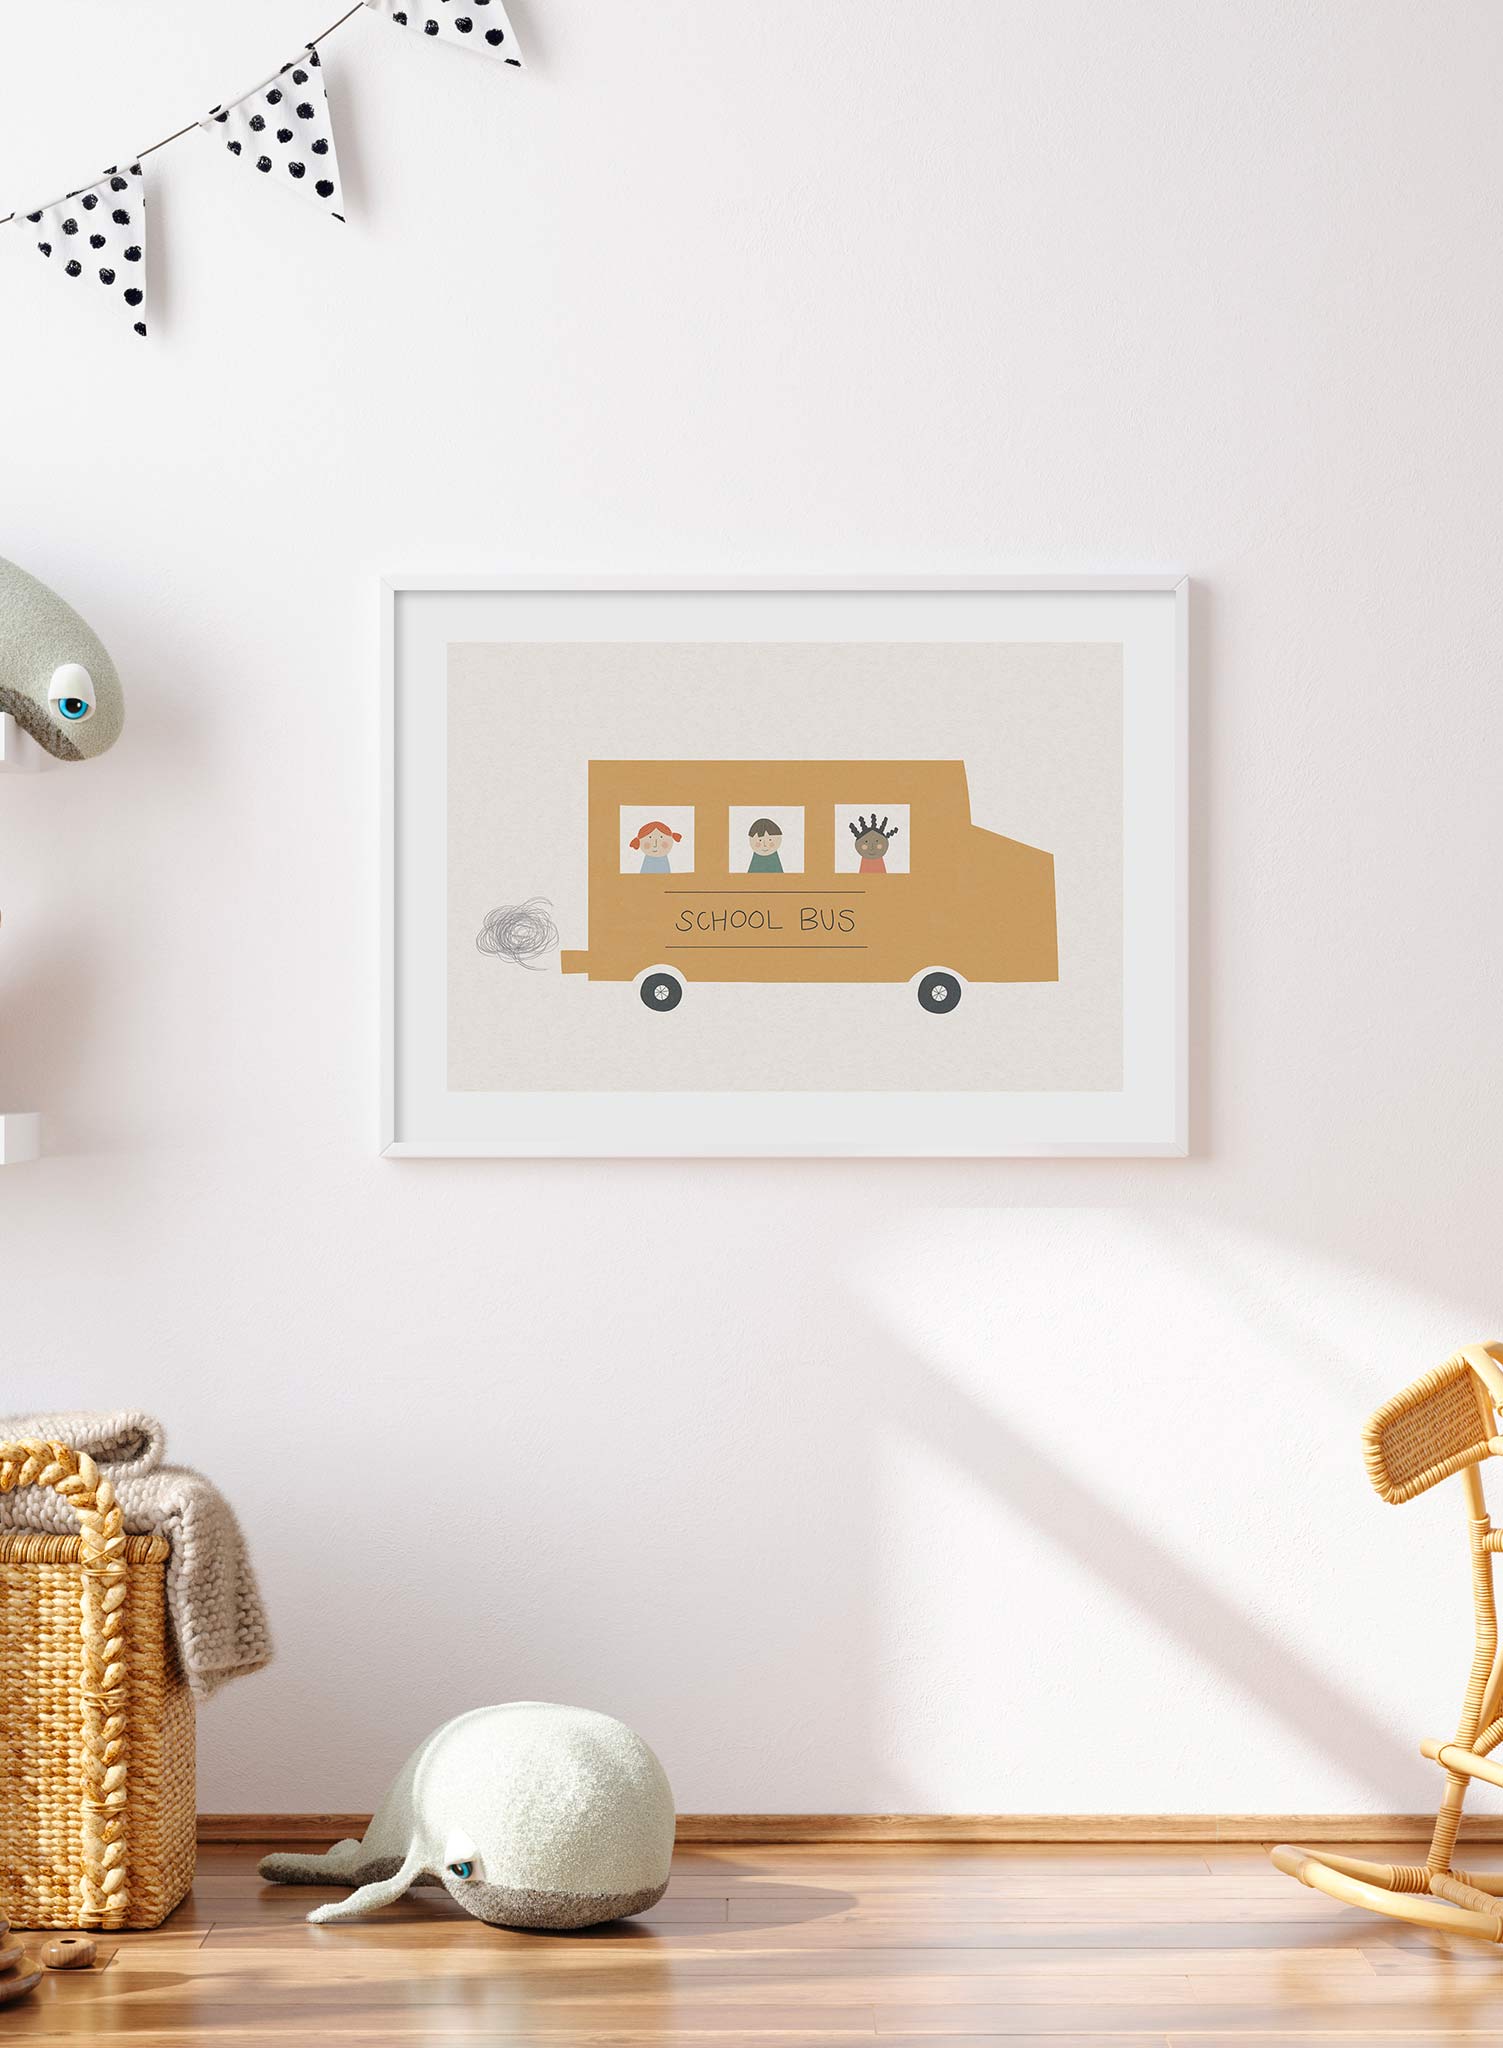 School Bus is a minimalist illustration by Opposite Wall of the traditional yellow school bus transporting students to school.